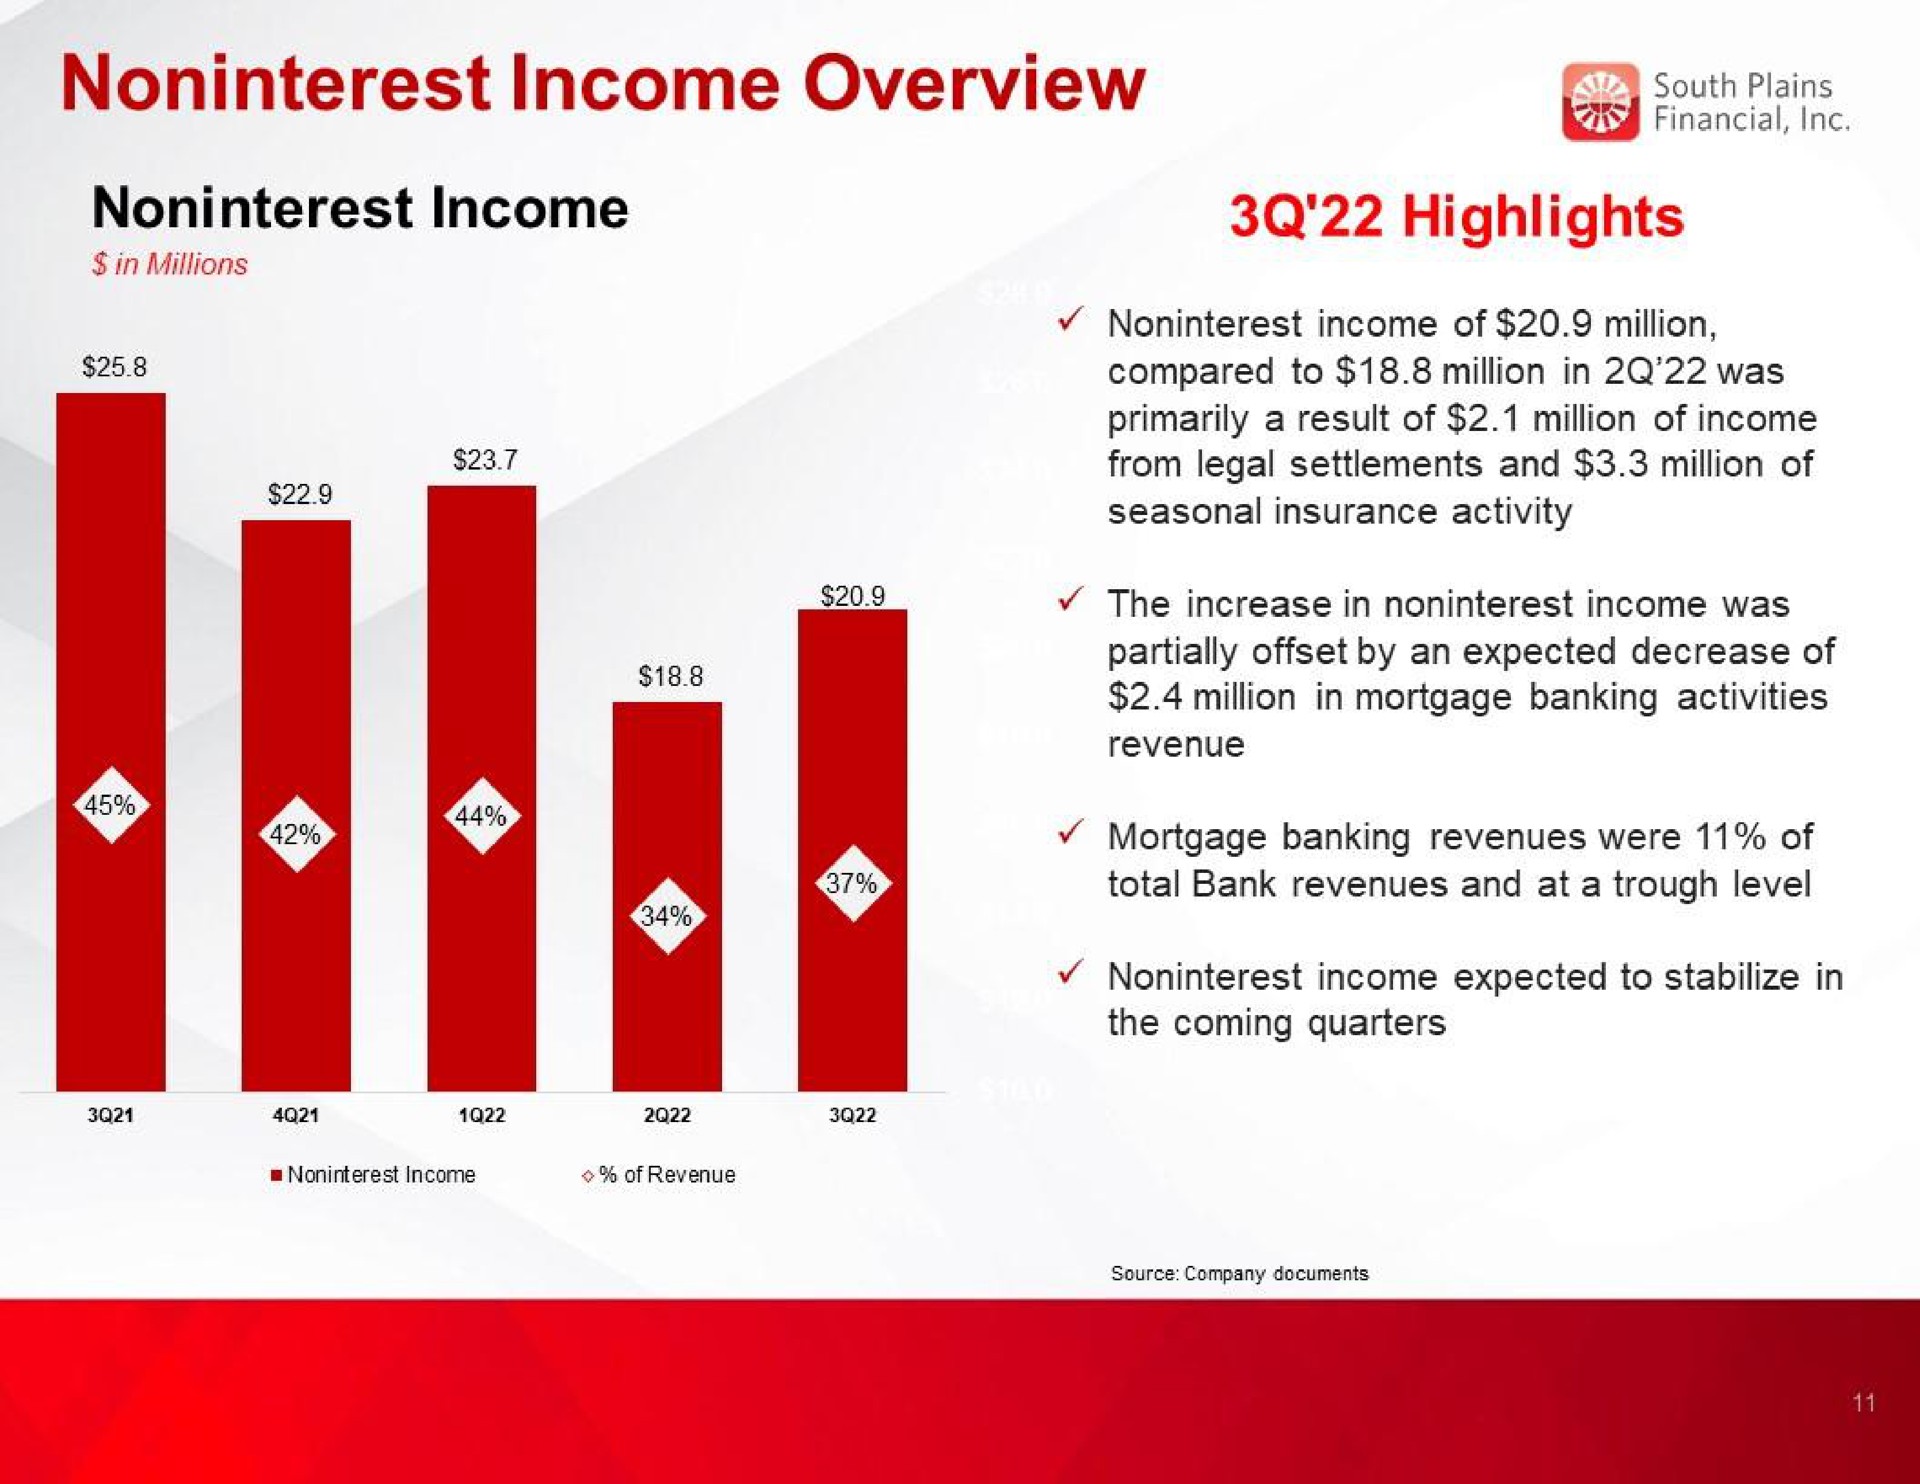 income overview income highlights | South Plains Financial